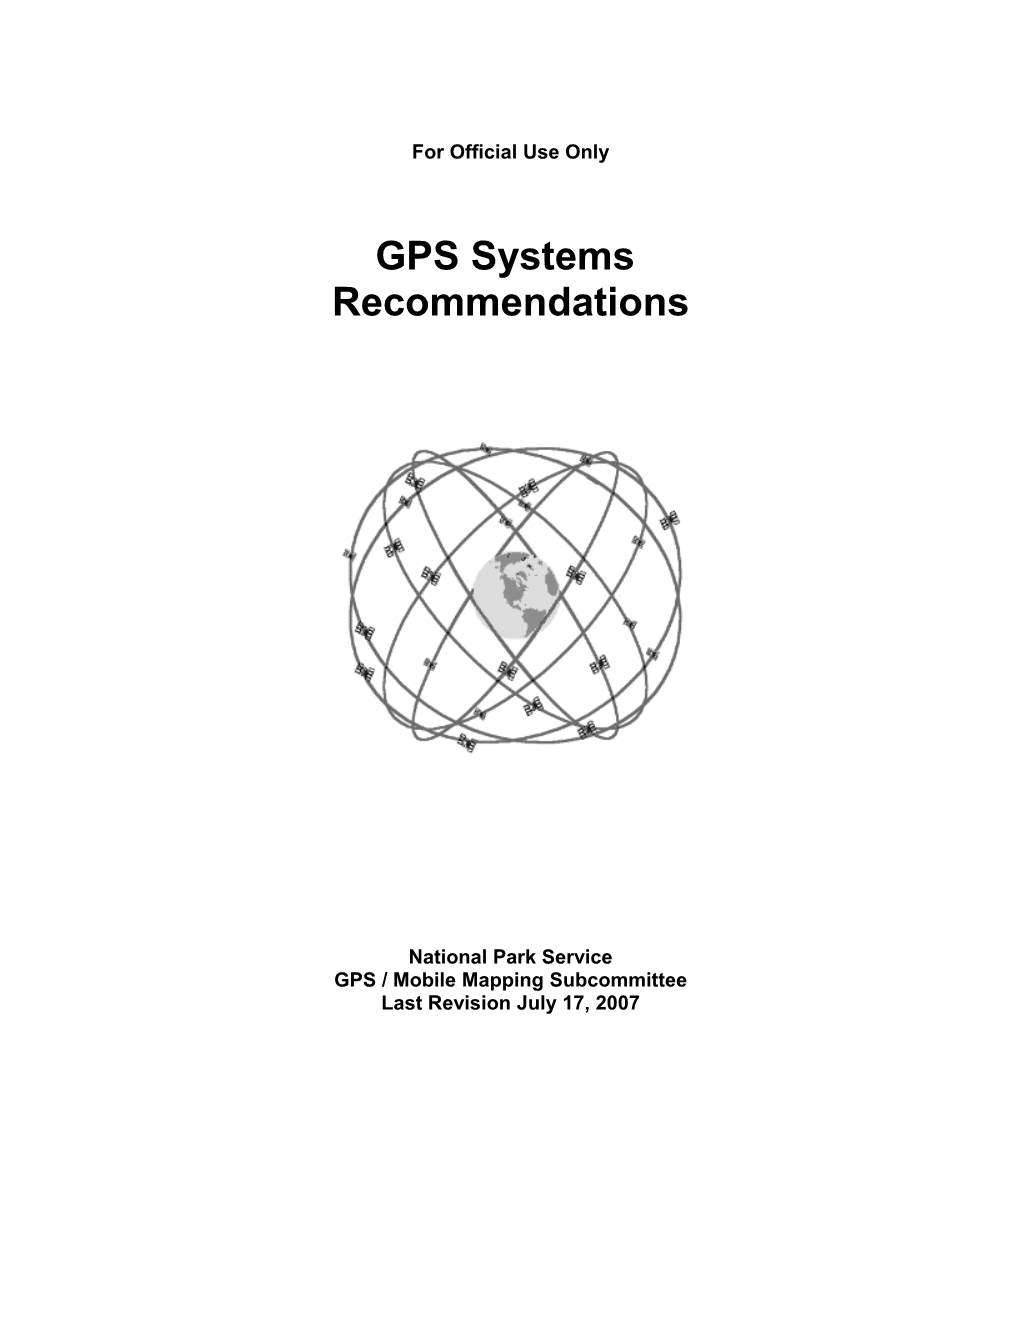 GPS Systems Recommendation